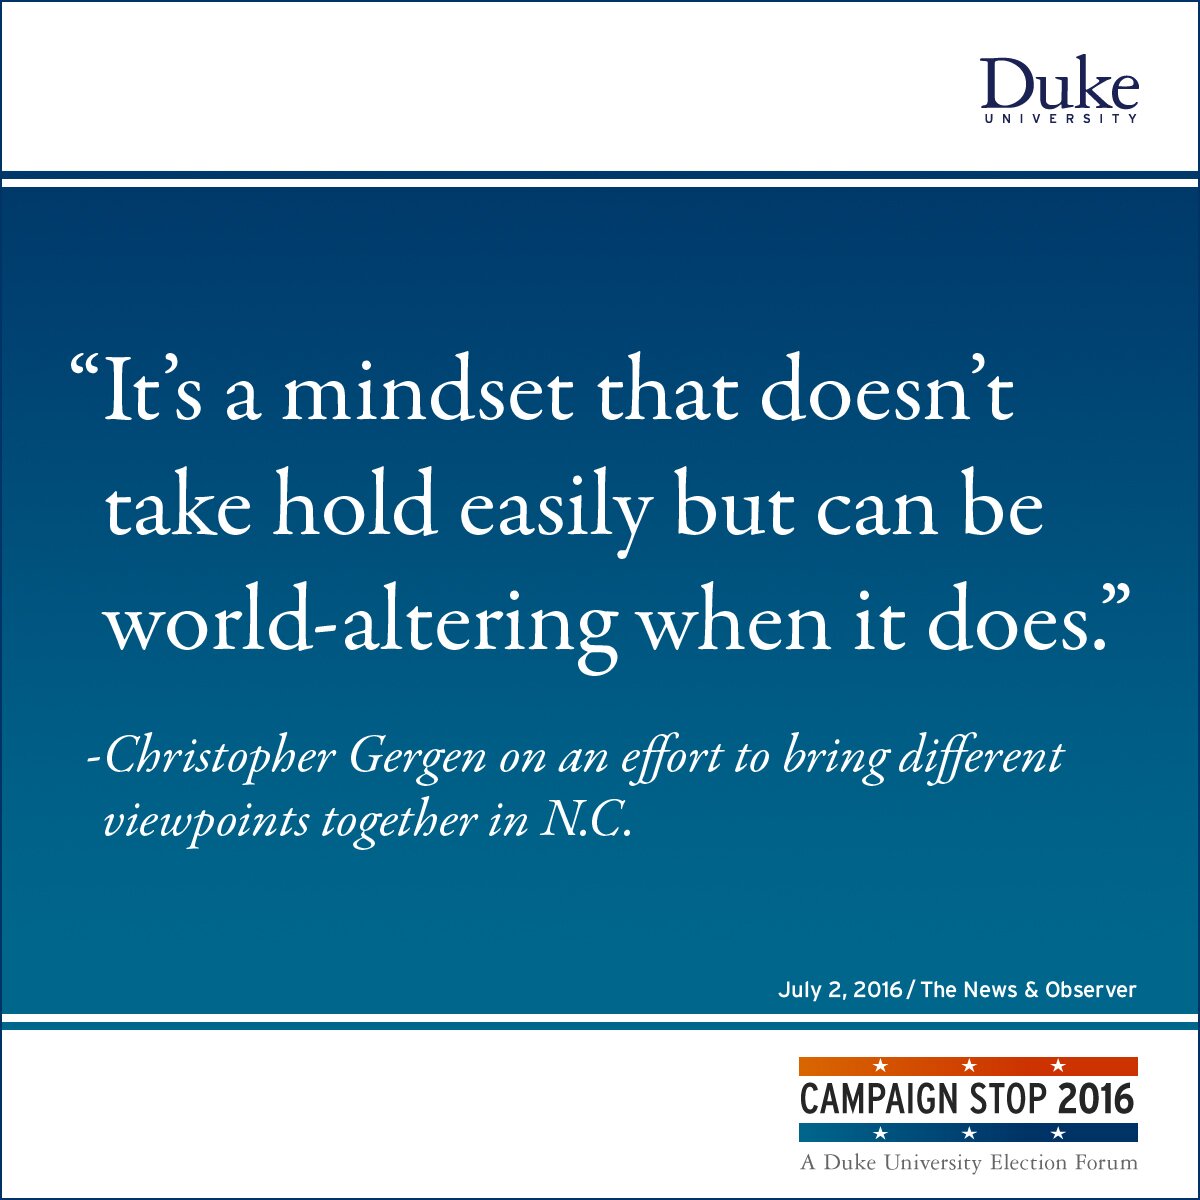 “It’s a mindset that doesn’t take hold easily but can be world-altering when it does.” -Christopher Gergen on an effort to bring different viewpoints together in N.C.